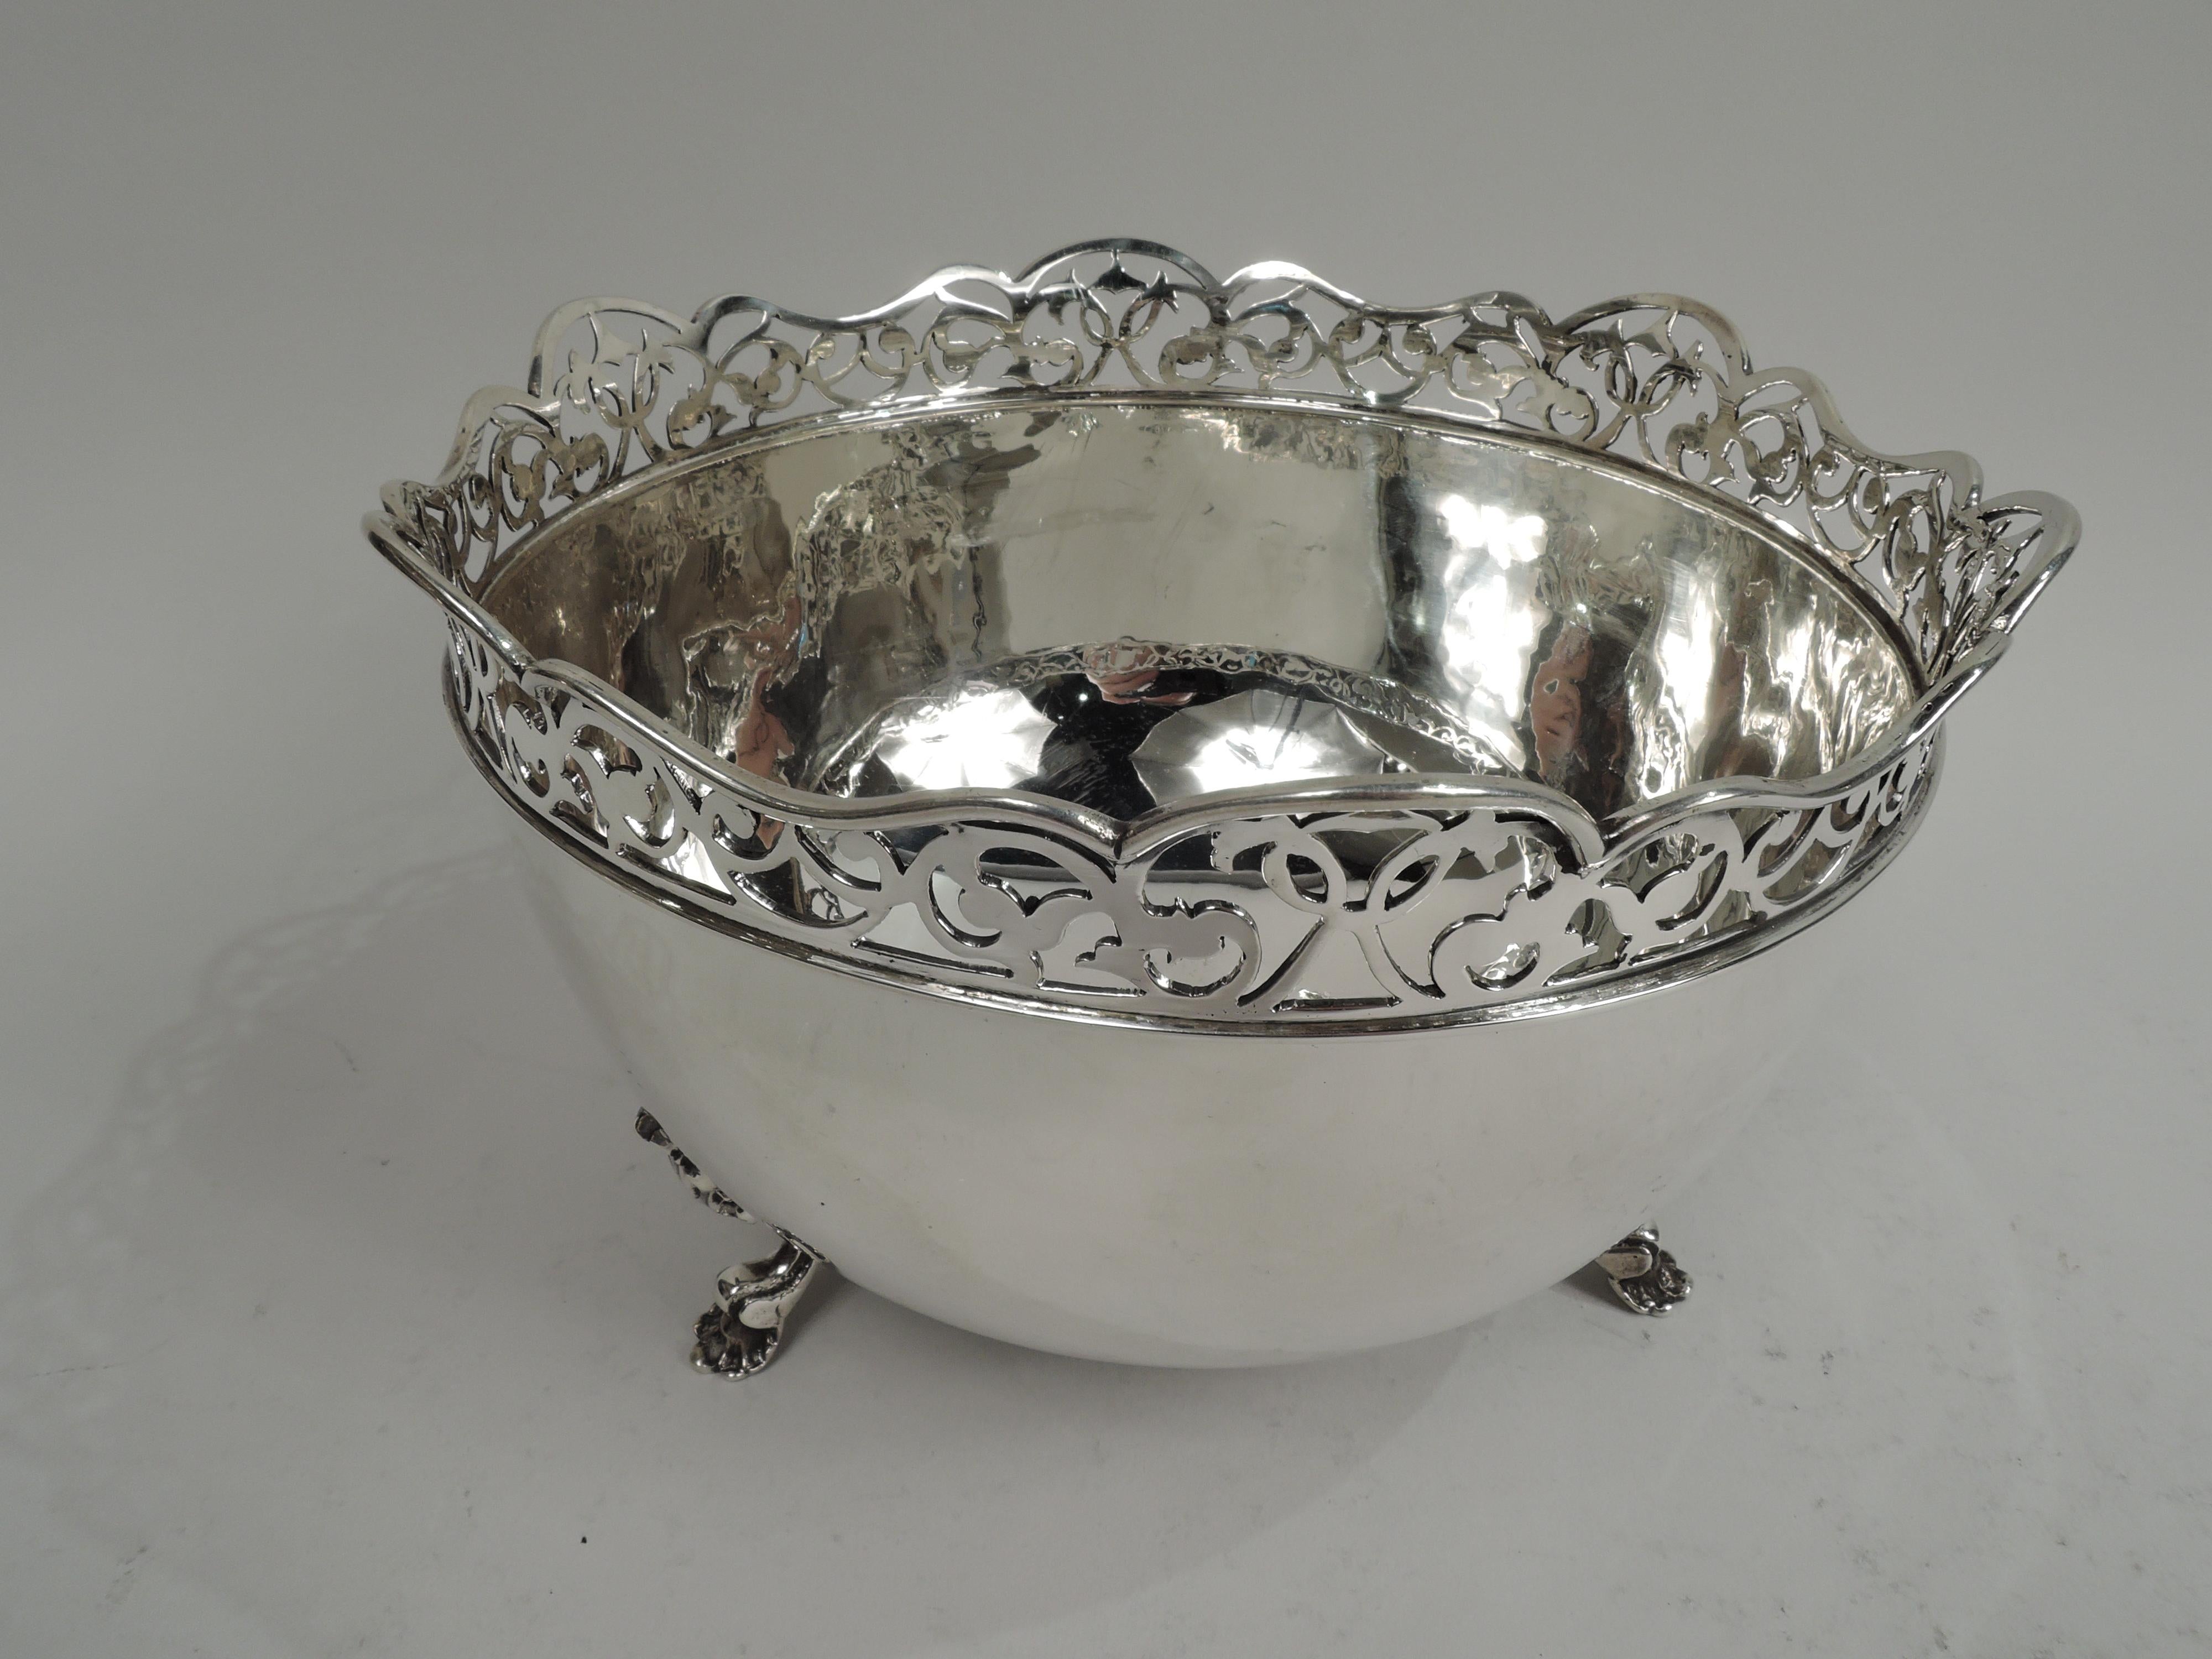 Edwardian Classical sterling silver bowl. Made by George Nathan & Ridley Hayes in 1904. Round and curved with scrolled open rim and three scrolled leaf supports. Fully marked. Weight: 15 troy ounces.